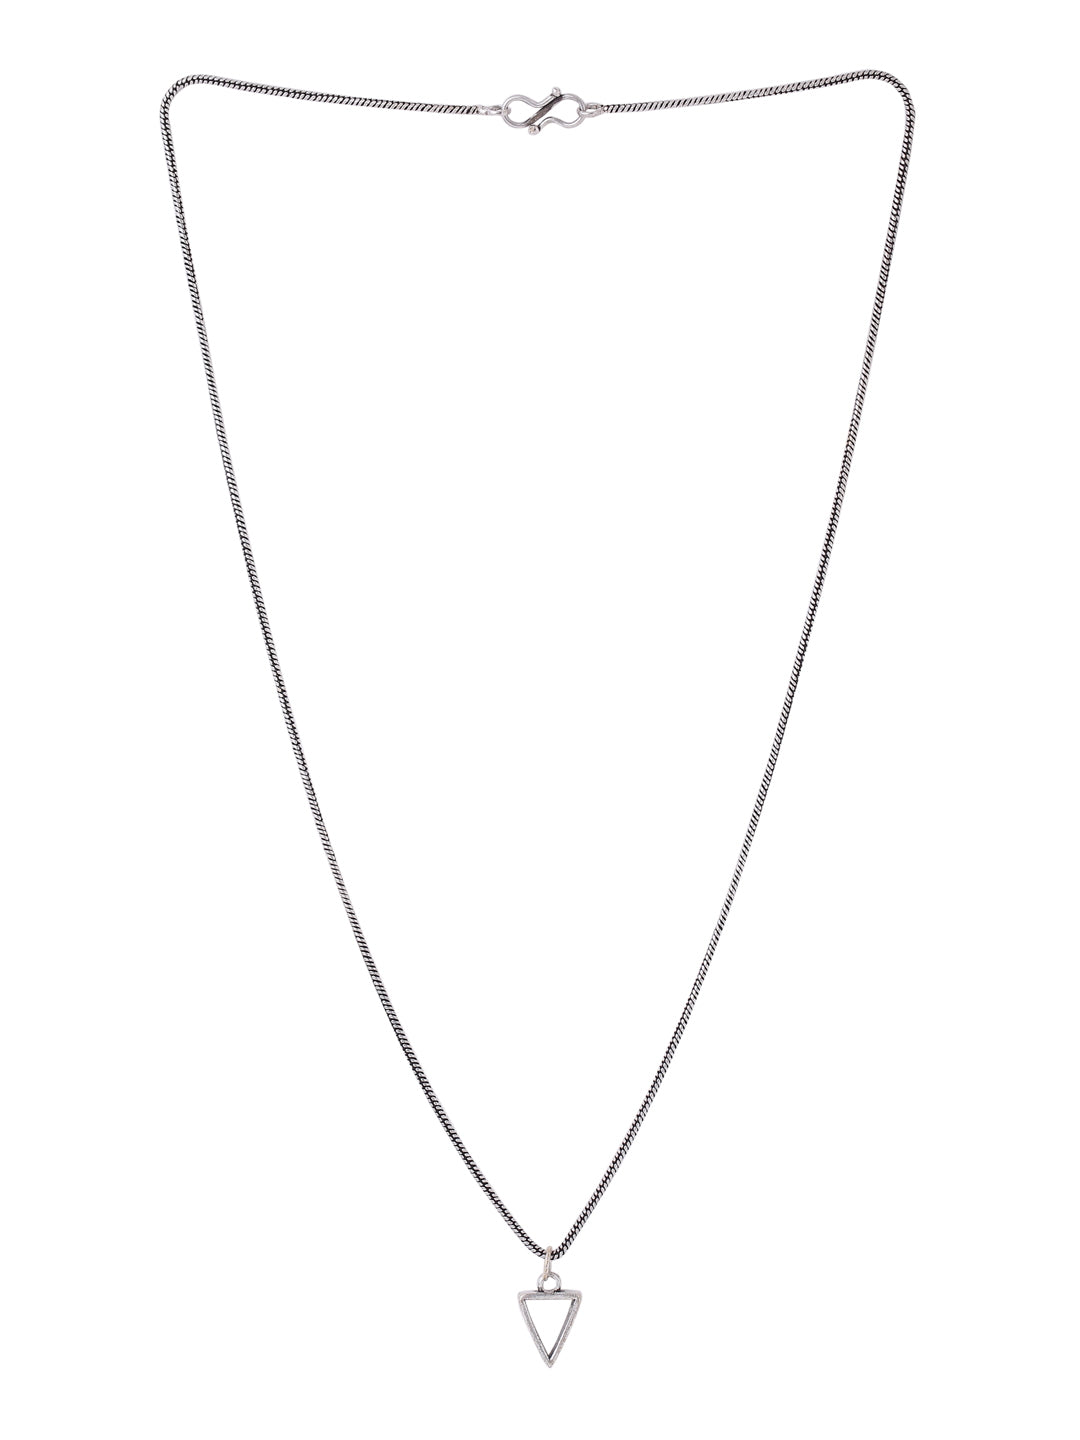 triangle-silver-necklace-for-men-viraasi